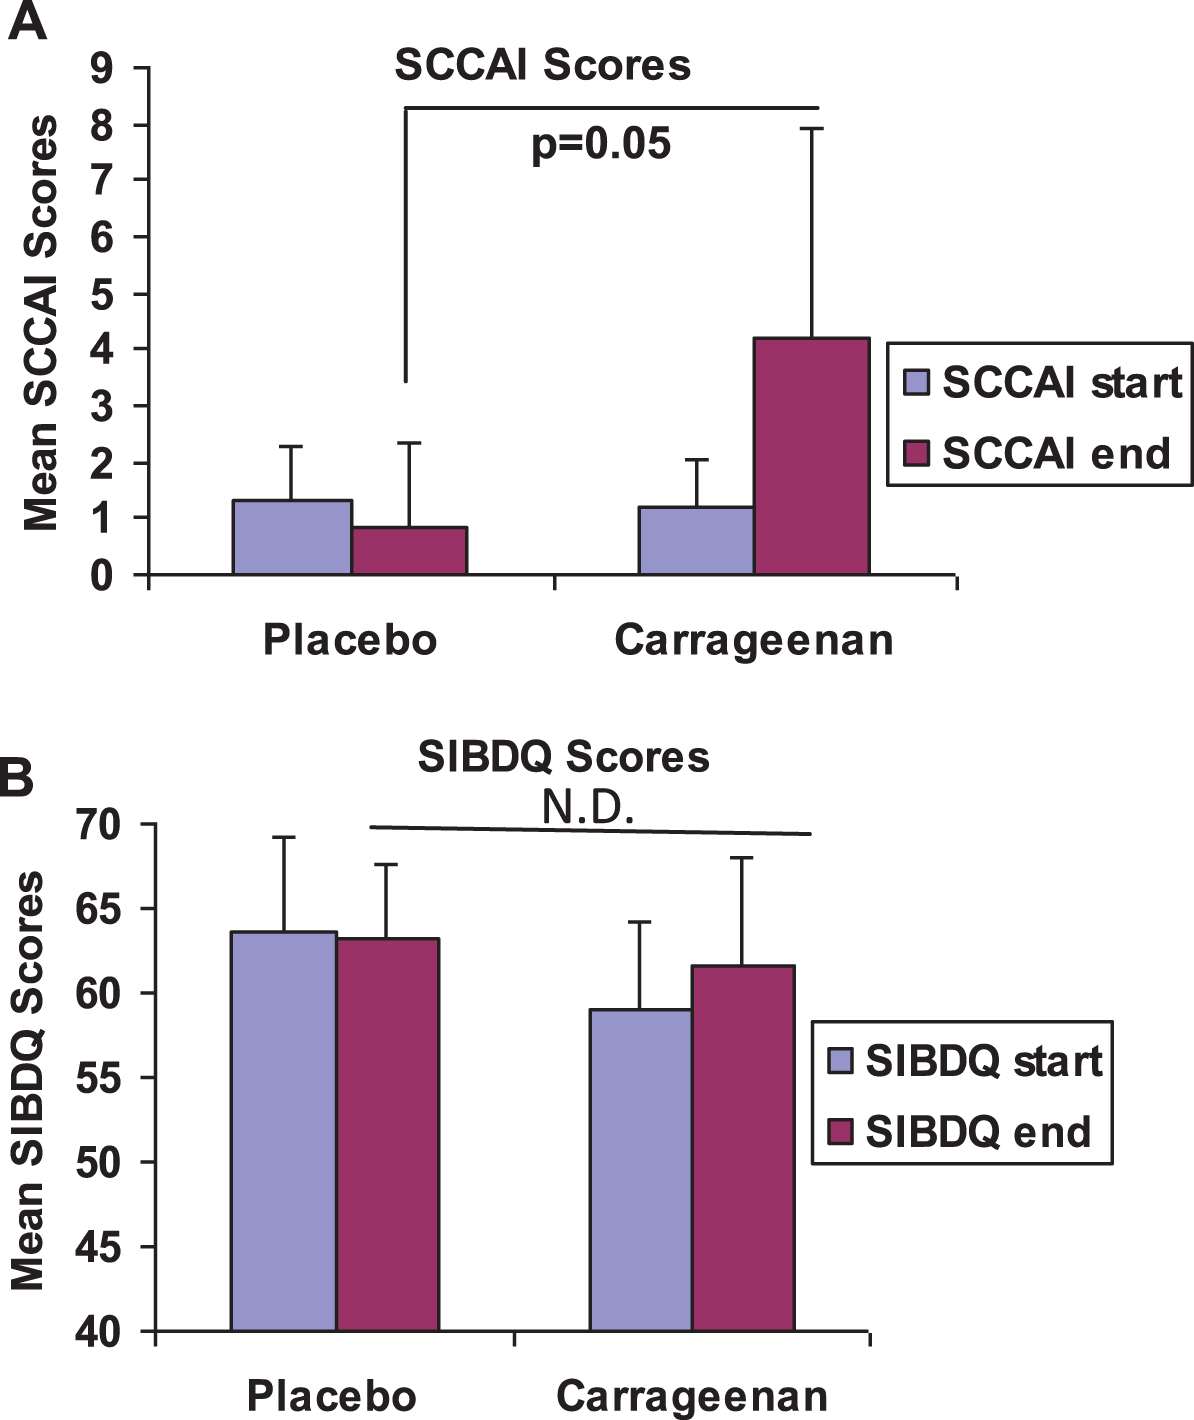 Average SCCAI and SIBDQ scores for placebo and carrageenan-supplemented groups. (A) Mean SCCAI scores were similar for both groups at the onset of study participation. At the conclusion of participation, SCCAI scores were higher in the carrageenan-supplemented group, consistent with the occurrence of relapses in this group. Mean SCCAI scores at the endpoints were 0.86±1.46 (n = 7), compared to 4.20±3.70 in the group who received carrageenan supplements (p = 0.05, unpaired t-test, two-tailed, n = 5). (B) Initial and final scores on the SIBDQ were similar in both groups, with mean values of 63.6±5.6 at onset and 63.3±4.3 at conclusion in the placebo group (n = 7). In the carrageenan- supplemented group (n = 5), initial mean score was 59.0±5.2, and final average score was 61.6±6.5.